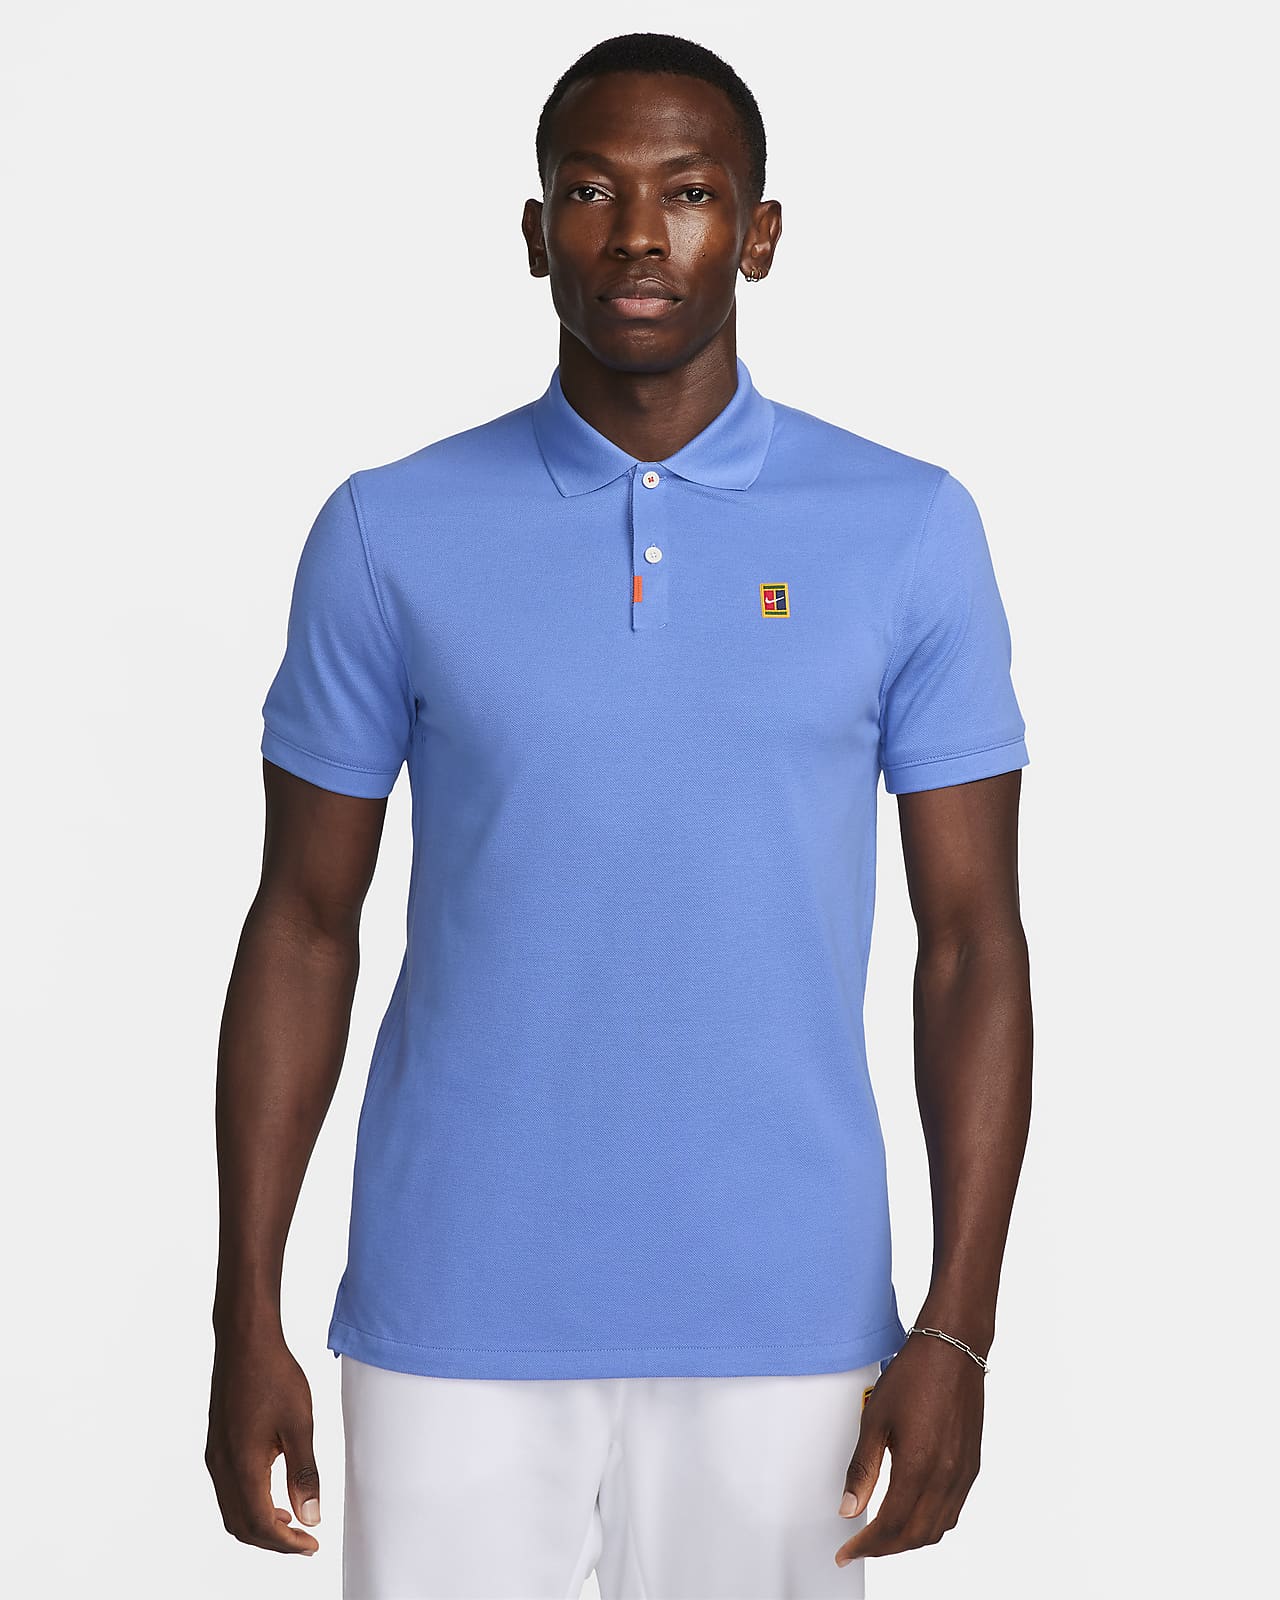 https://static.nike.com/a/images/t_PDP_1280_v1/f_auto,q_auto:eco/0b2d4fdf-8a4a-4ab6-b539-7ed485dacab8/polo-slim-fit-polo-s969Wc.png